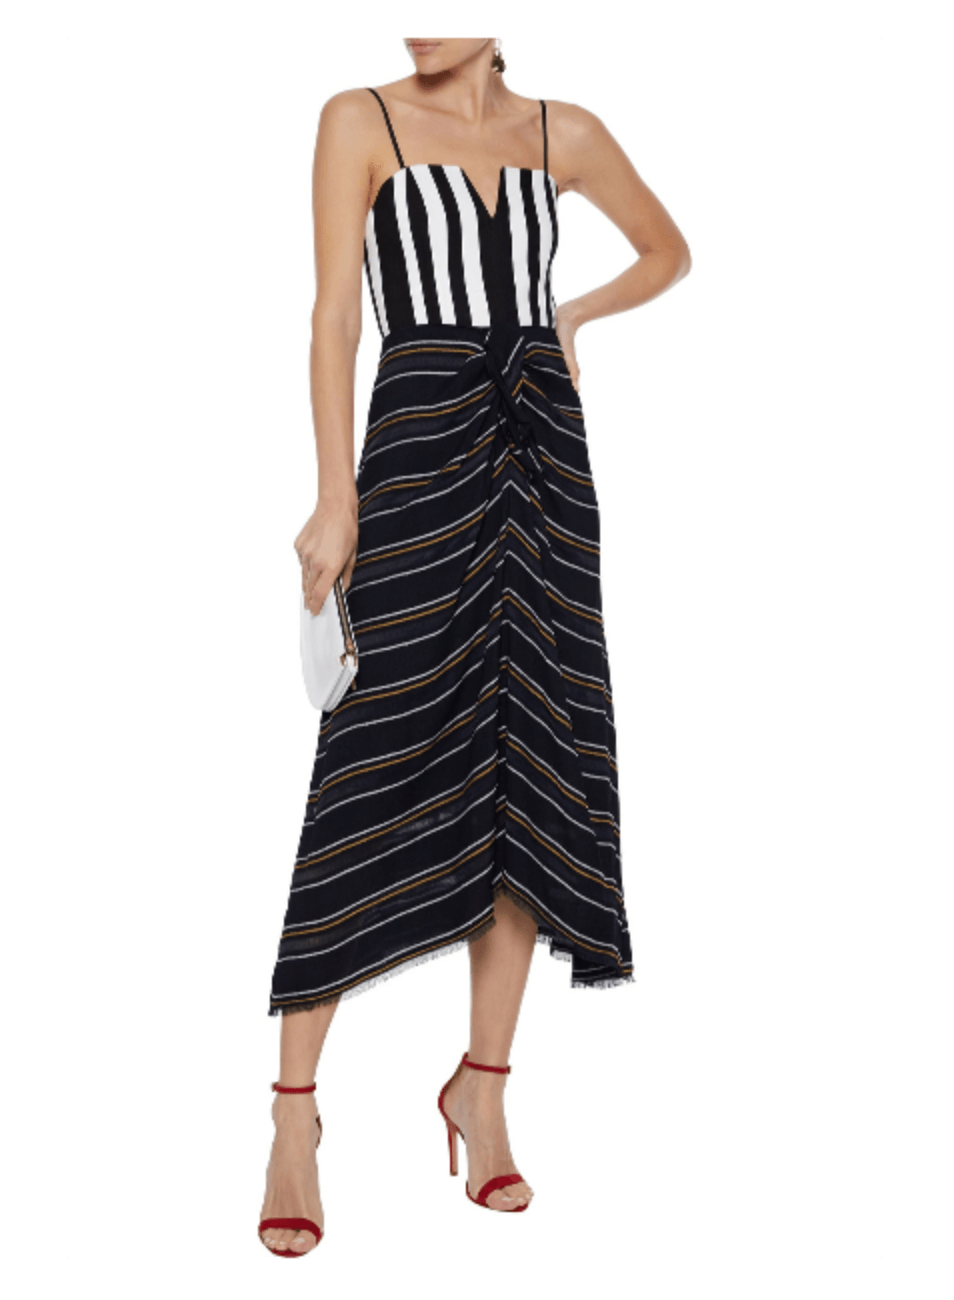 CROPPED STRIPED TOP - BLACK AND WHITE - codressing